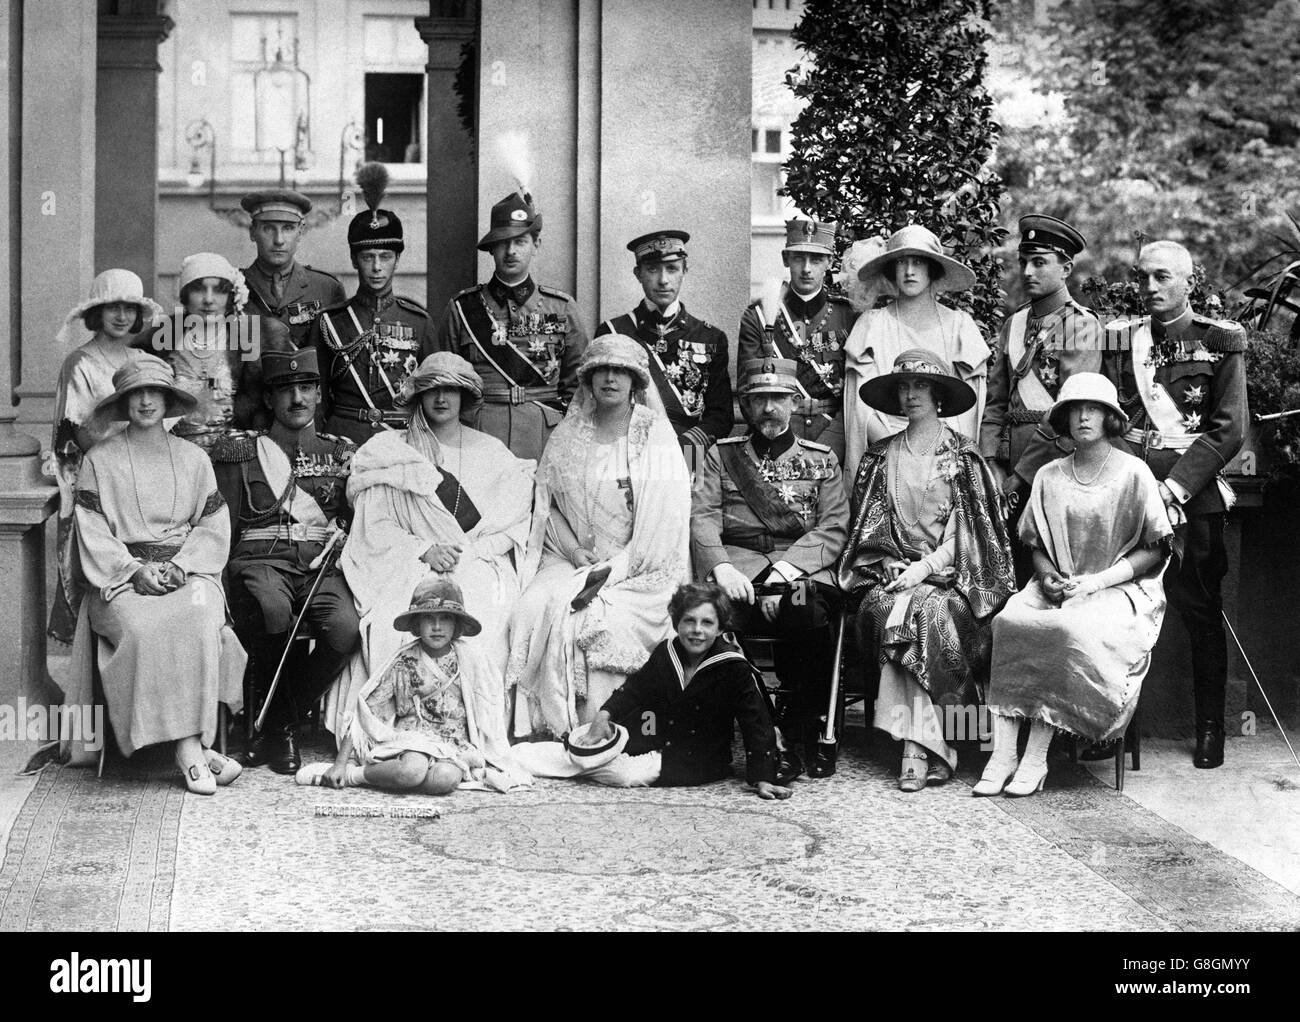 Family photograph from the marriage of Alexander, King of the Serbs, Croats and Slovenes, to Princess Marie of Roumania. The Duke of York (top row 4th from left) was representing King George V throughout the ceremony. In the foreground (l-r) Princess Helena of Rumania, King Alexander of Serbia, Queen Maria of Yugoslavia, Queen Maria of Rumania, King Ferdinand of Rumania, Princess Kira, Princess Beatrice. Stock Photo